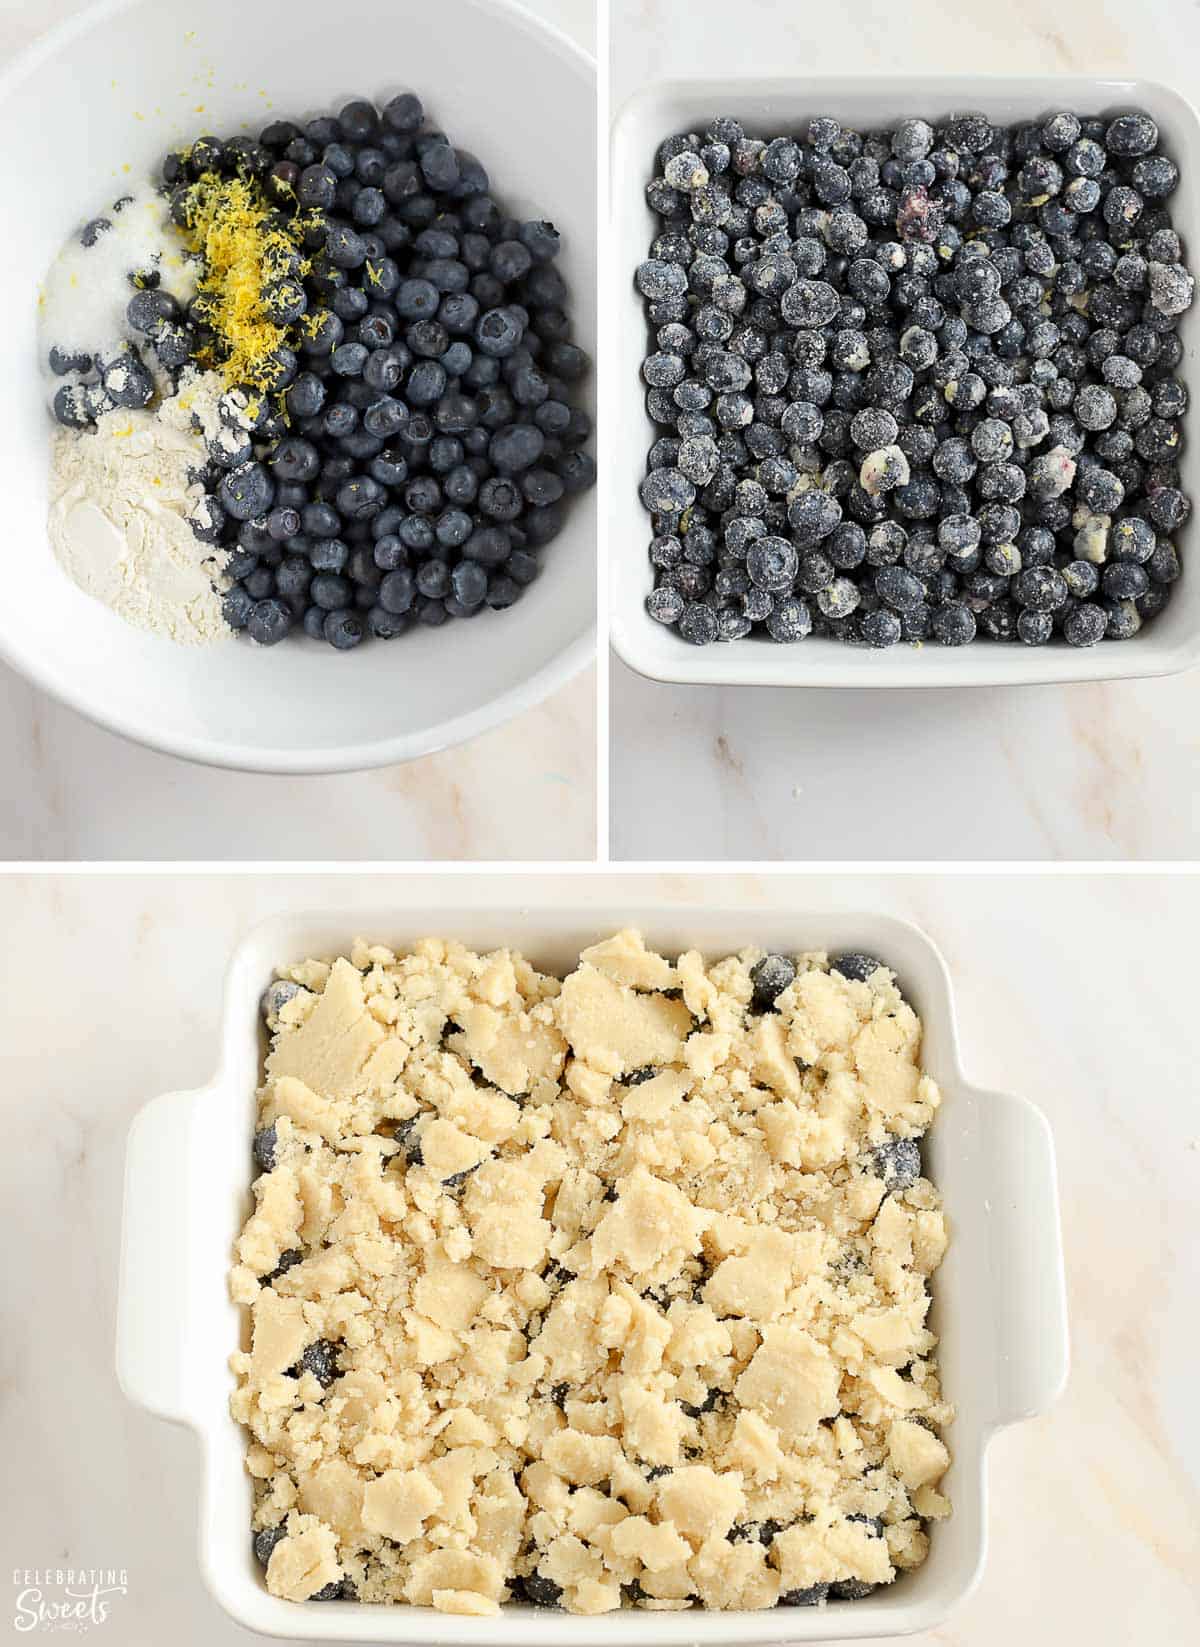 Making blueberry cobbler collage: blueberries with flour, sugar, and lemon zest in a large bowl. Uncooked blueberry cobbler in a white square baking dish.